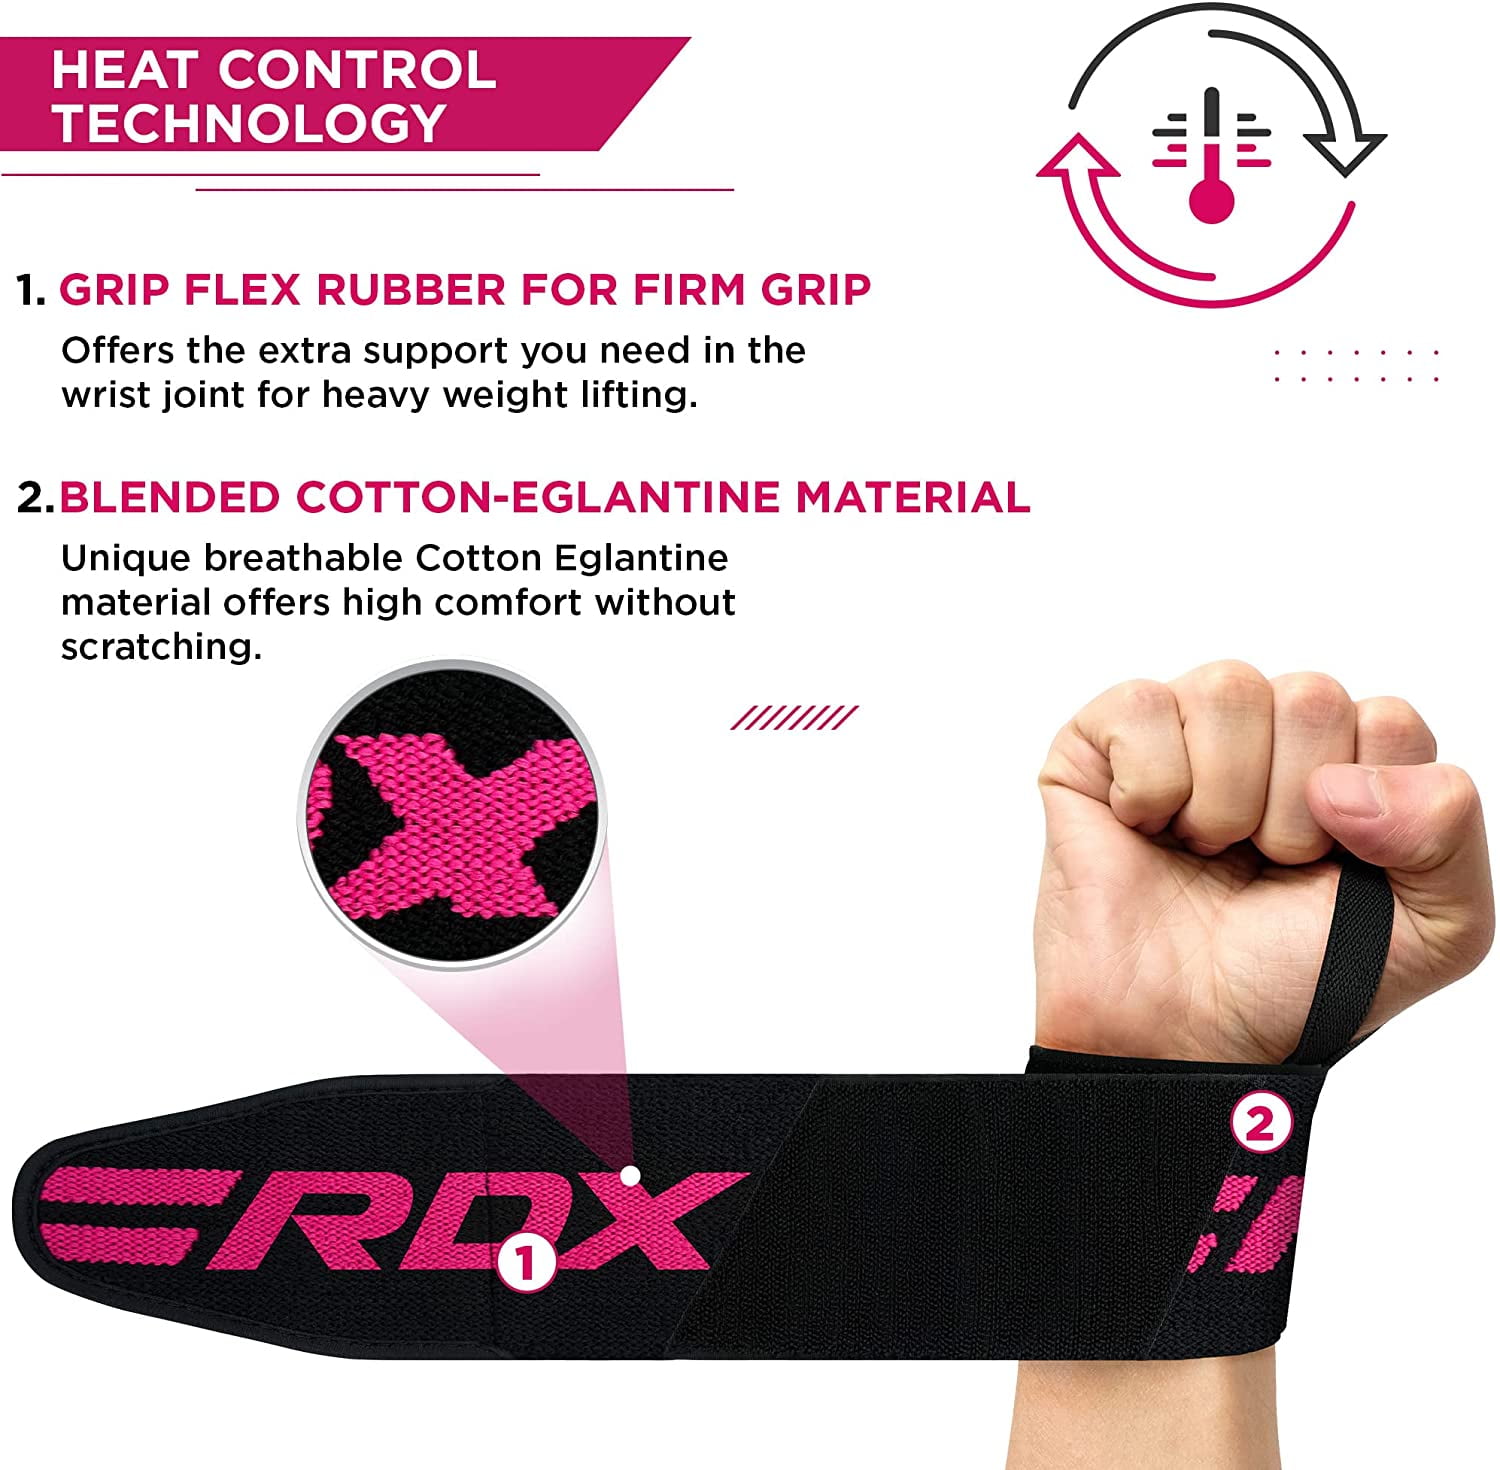 Gymnastics Calisthenics Elasticated Pro 18” Cotton Straps IPL USPA Approved Powerlifting Bodybuilding Fitness Strength Gym Training WOD Workout Thumb Loop RDX Weight Lifting Wrist Support Wraps 